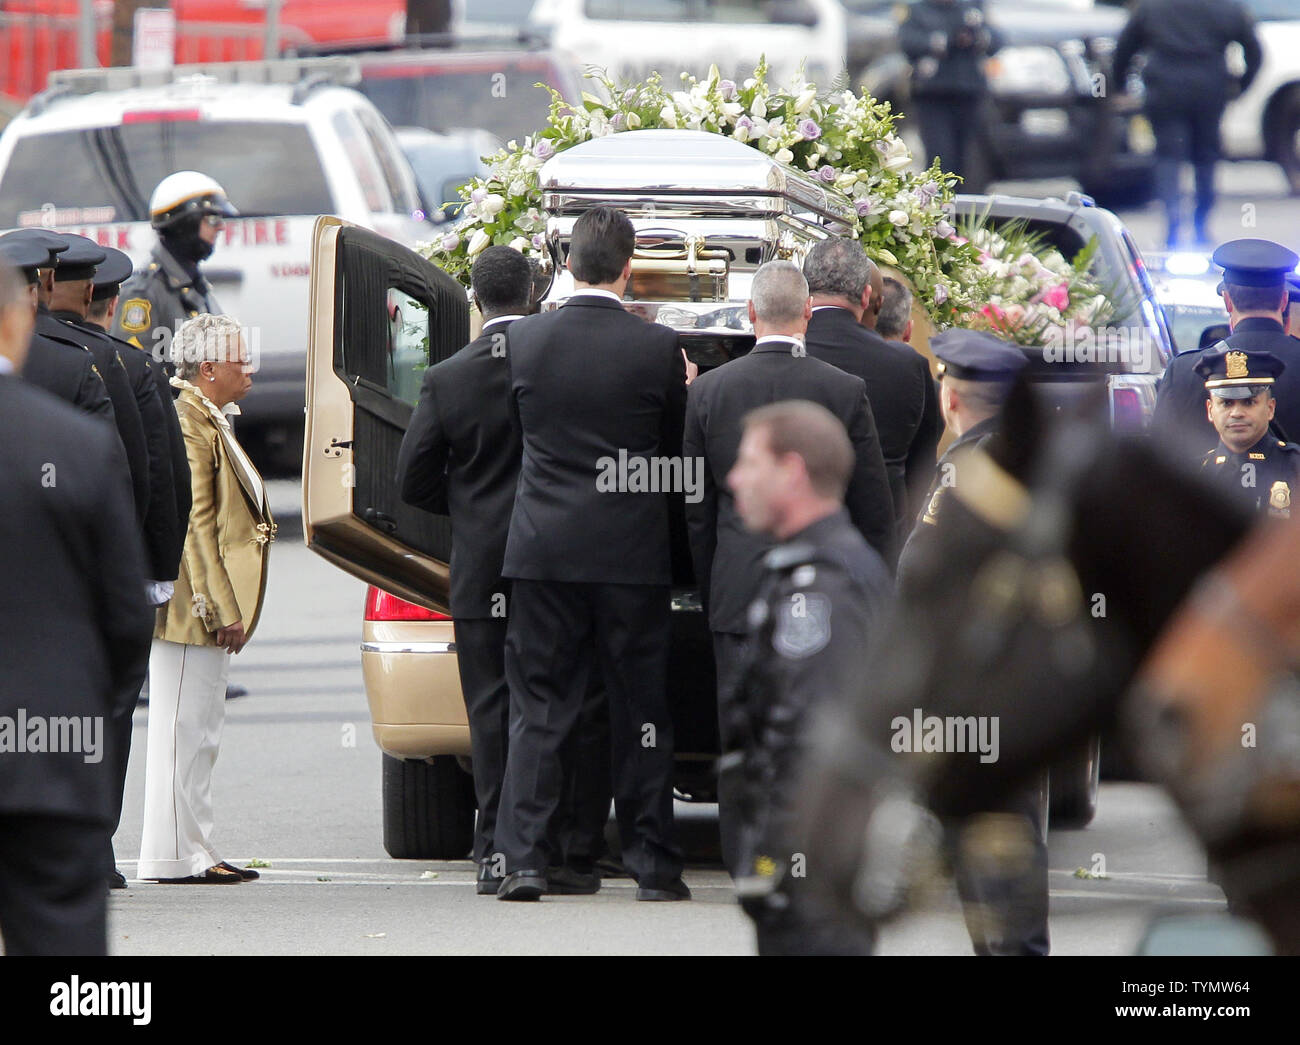 A casket containing the body of Whitney Houston is lifted into a gold hearse  from The New Hope Baptist Church at the Funeral of Whitney Houston in  Newark, New Jersey on February